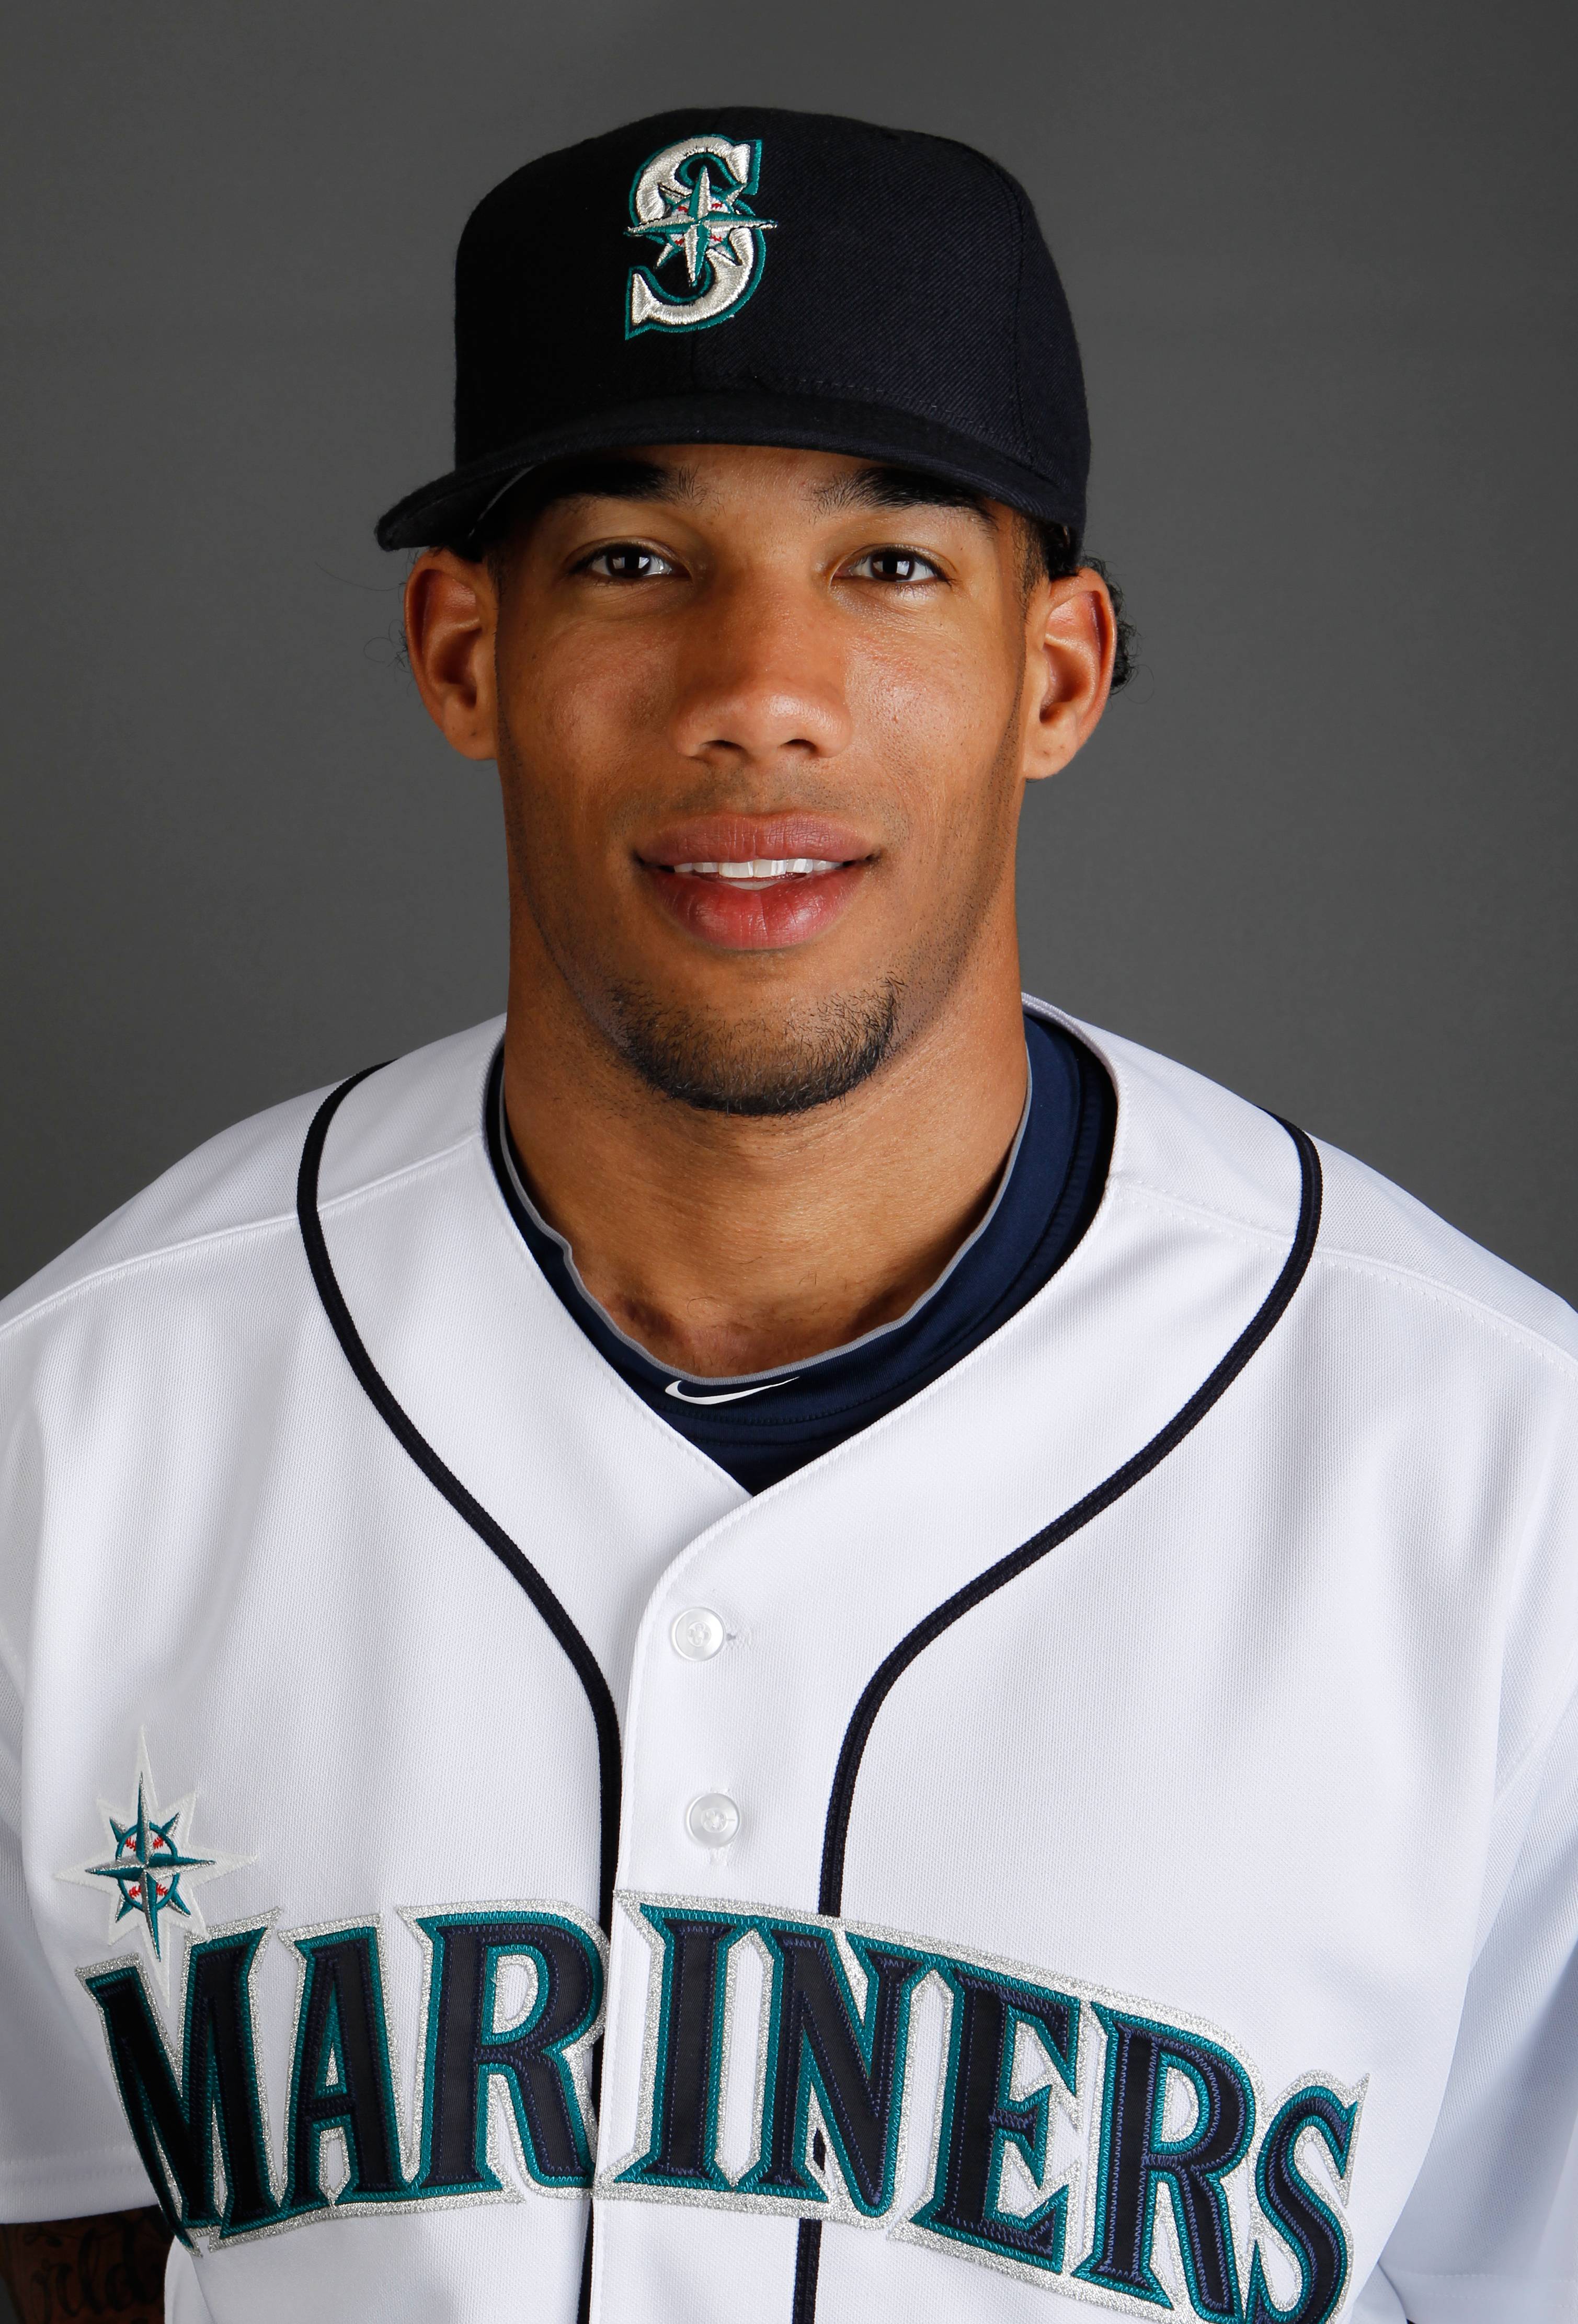 Seattle Mariners Outfielder Greg Halman Killed - Seattle Mariners outfielder Greg Halman, 24, was stabbed to death in The Hague, Netherlands, on Nov. 21. His 22-year-old brother was arrested as a suspect.(Photo: AP Photo/Charlie Neibergall)